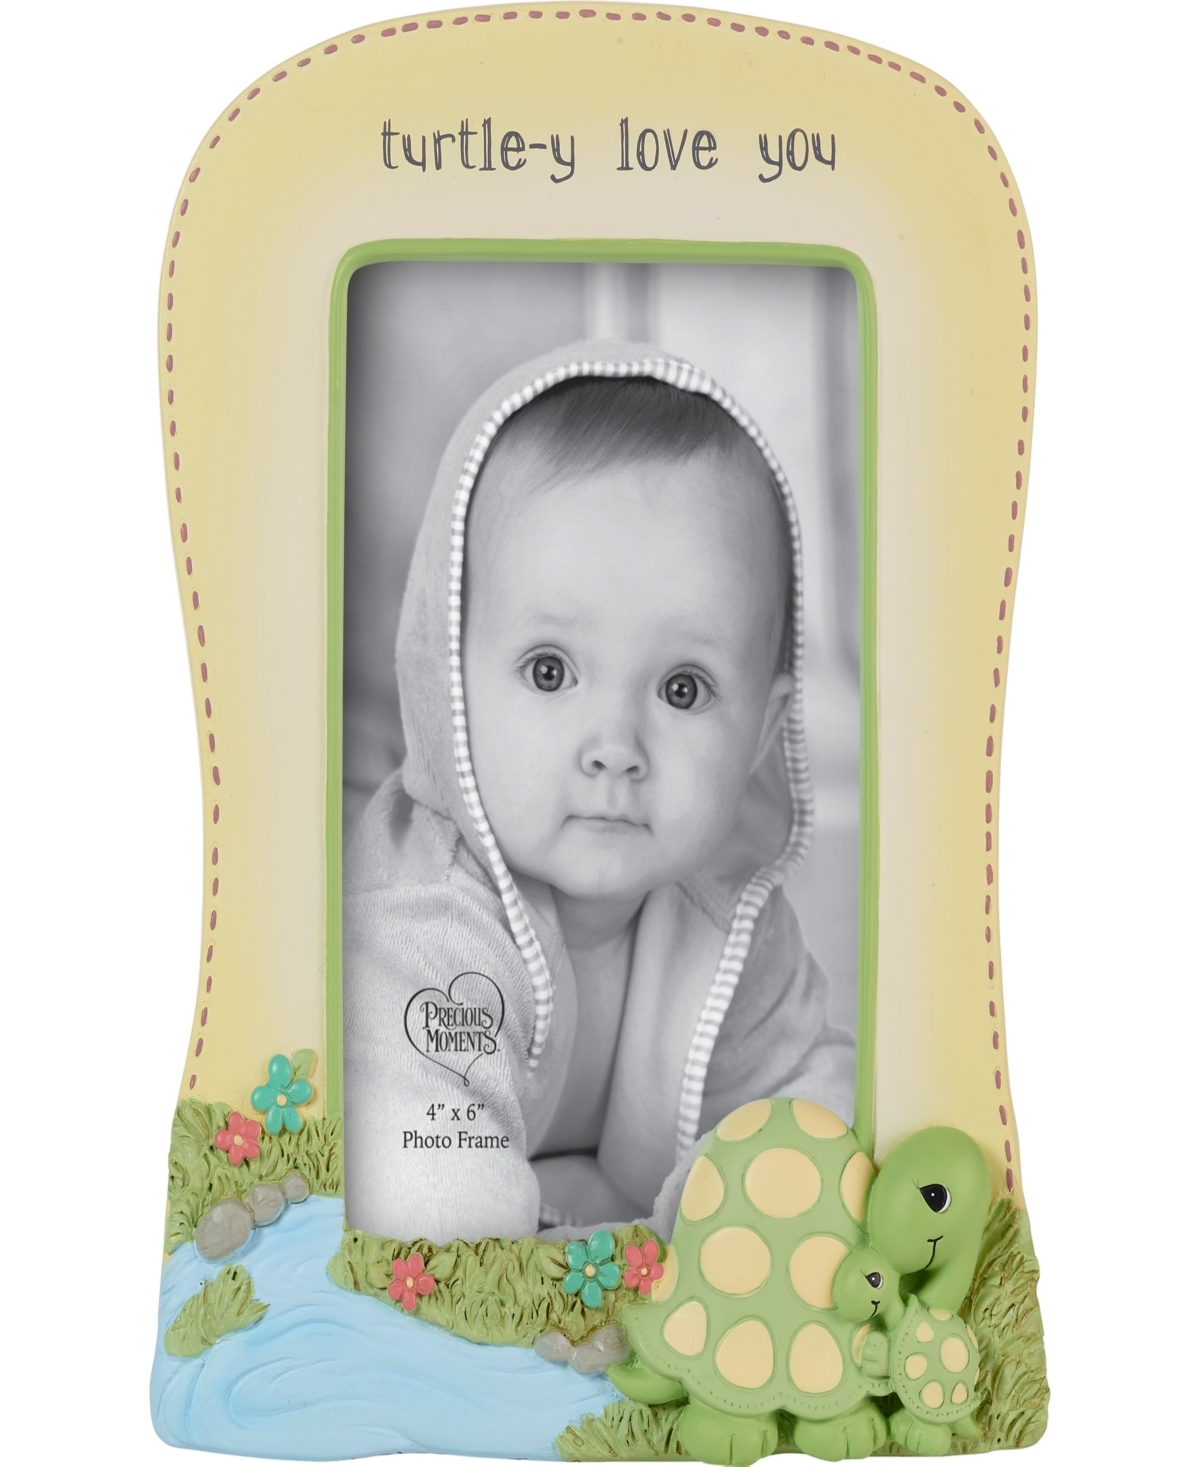 Precious Moments 222402 Turtle-y Love You Resin And Glass Photo Frame In Multicolored